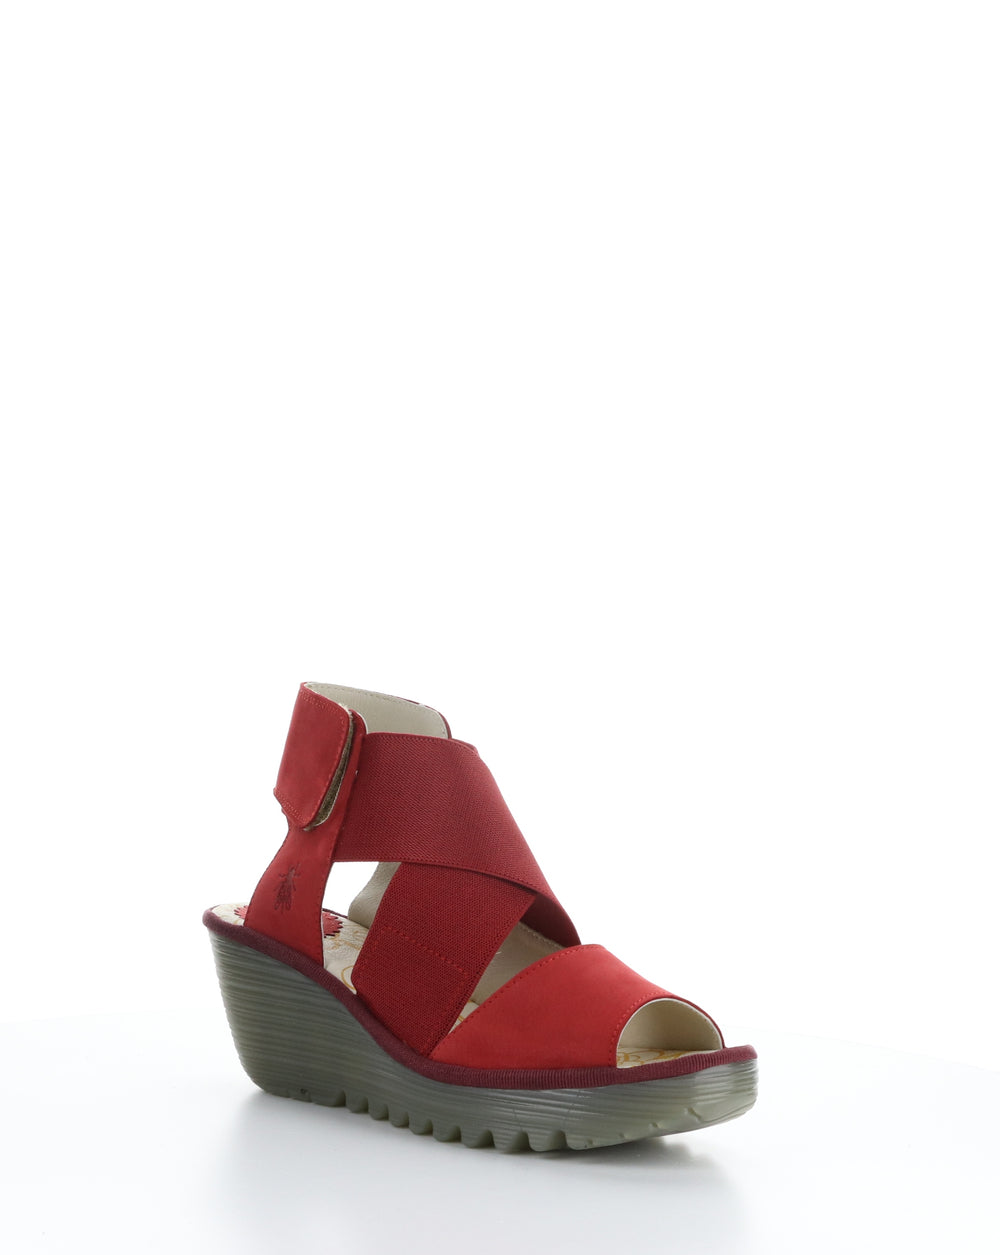 YUBA385FLY 008 LIPSTICK RED Elasticated Sandals